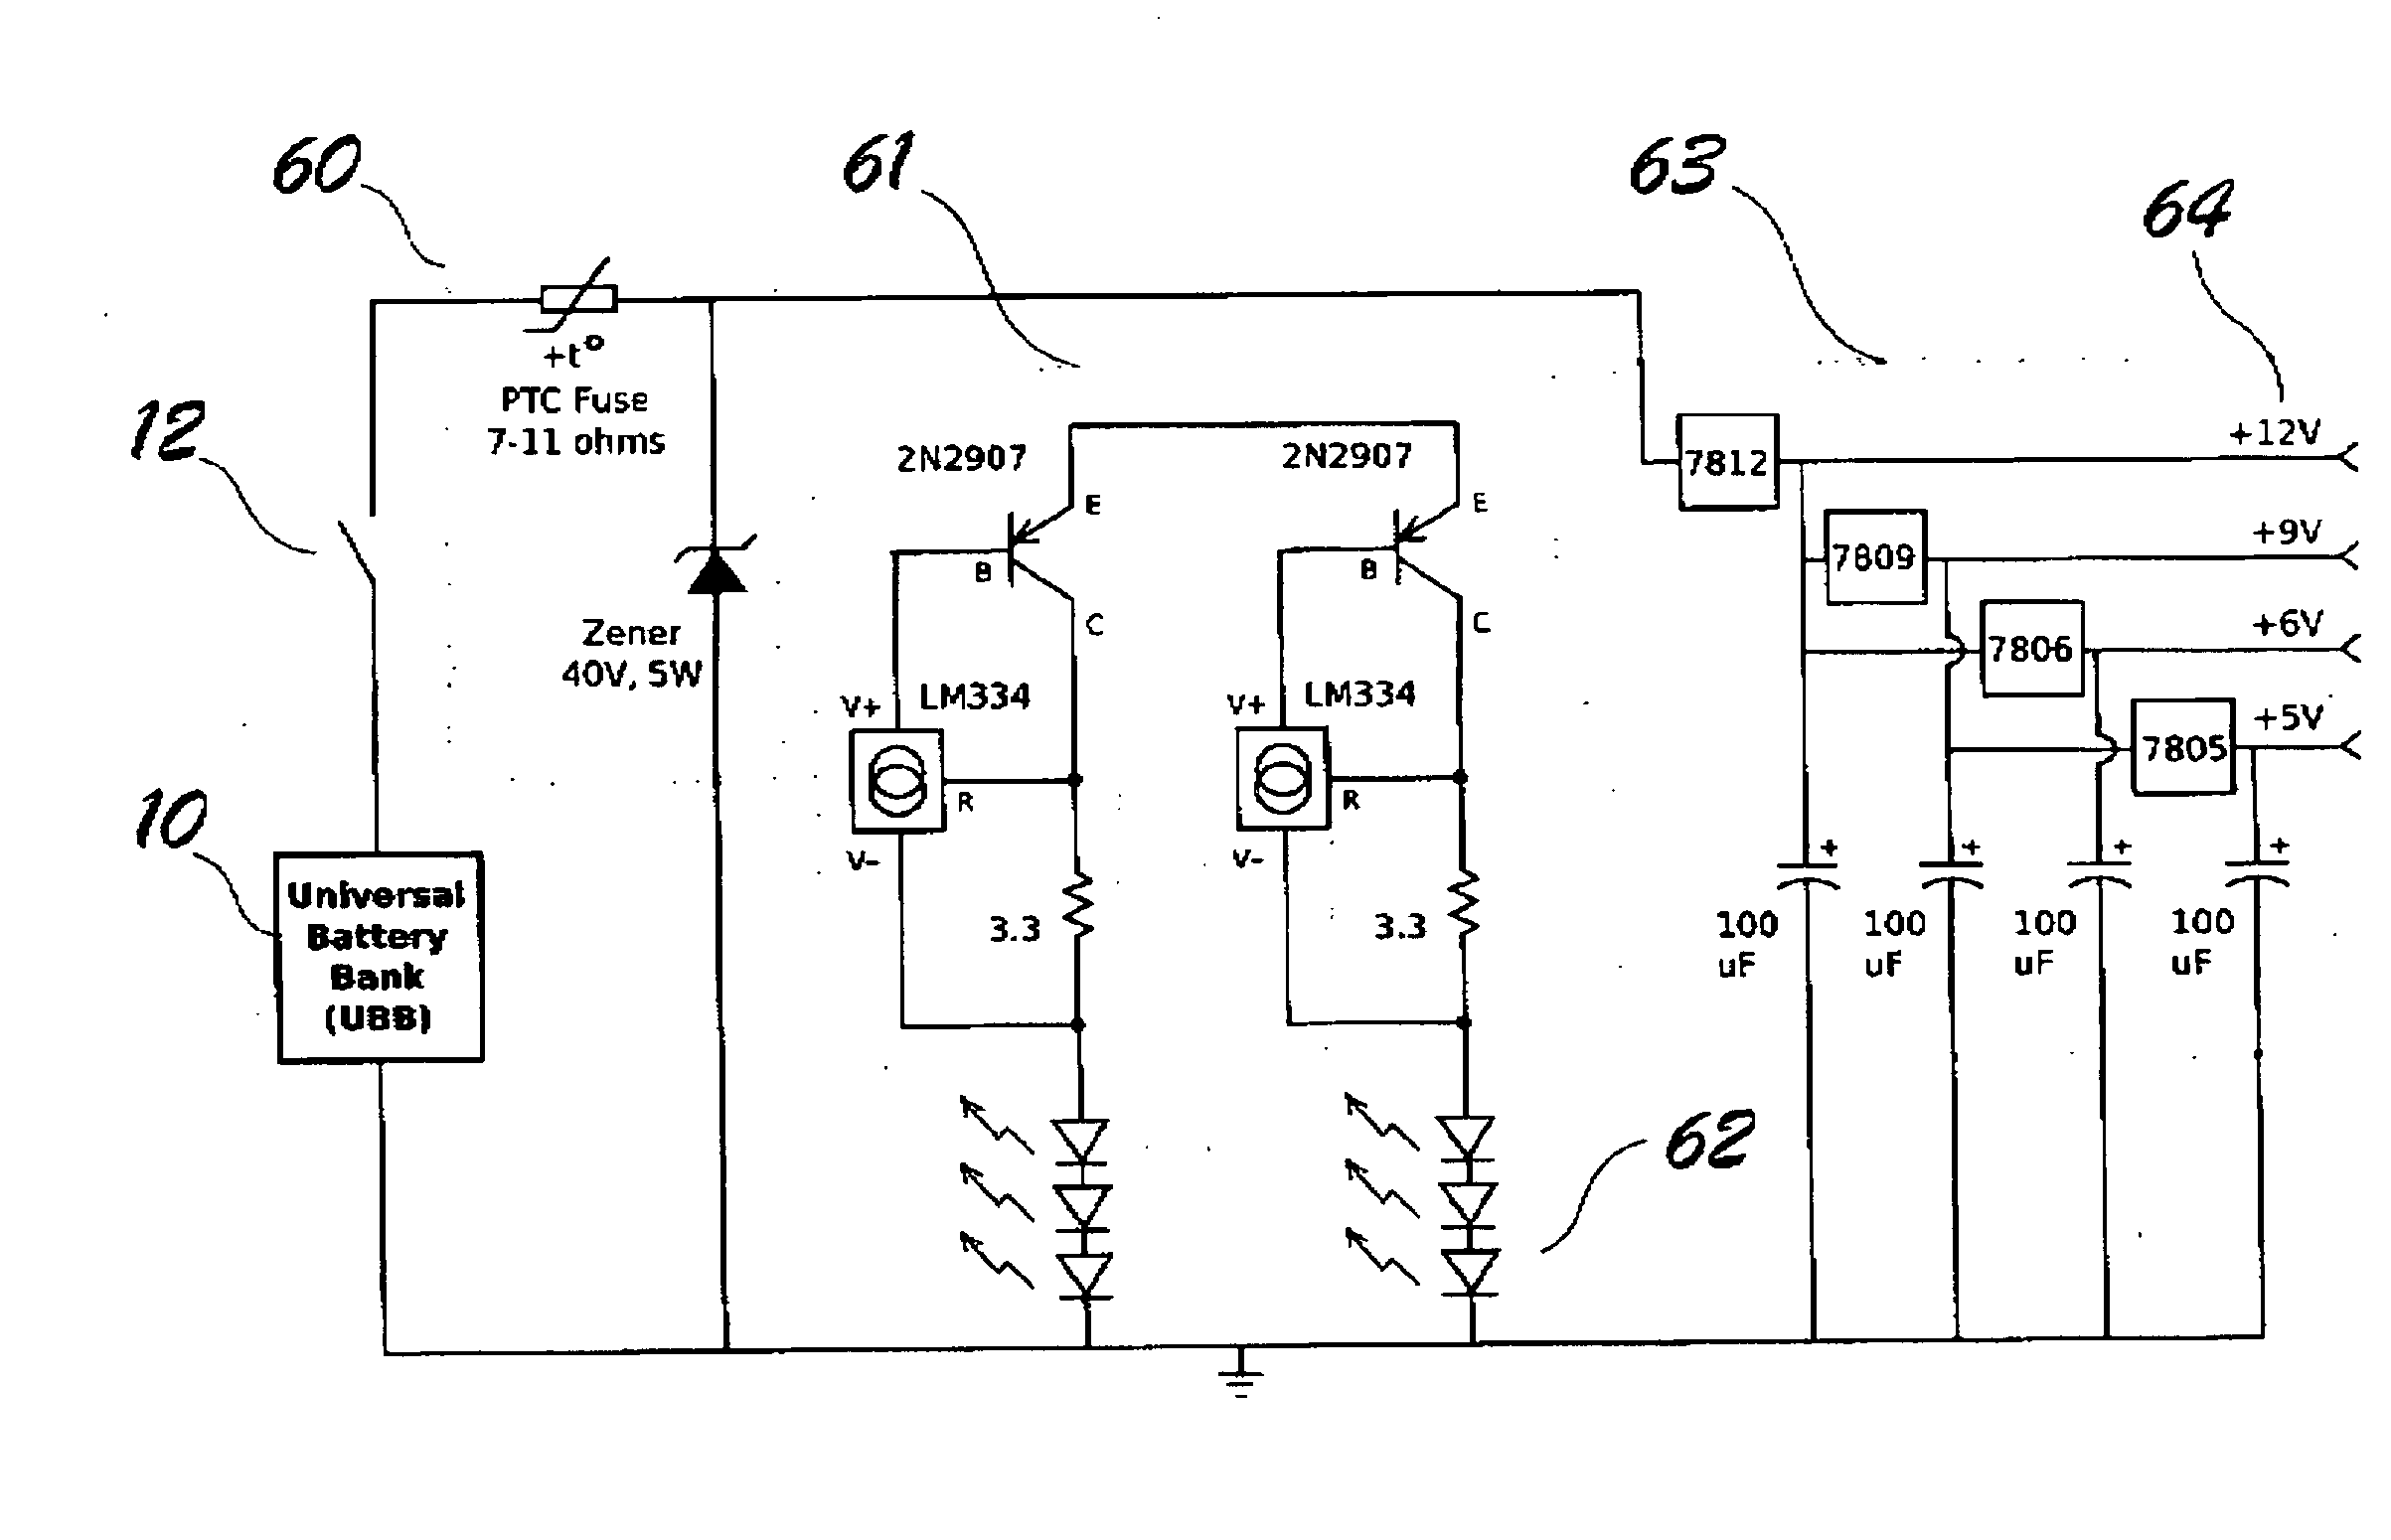 Method and Apparatus for Extending Service Life of a Battery Source